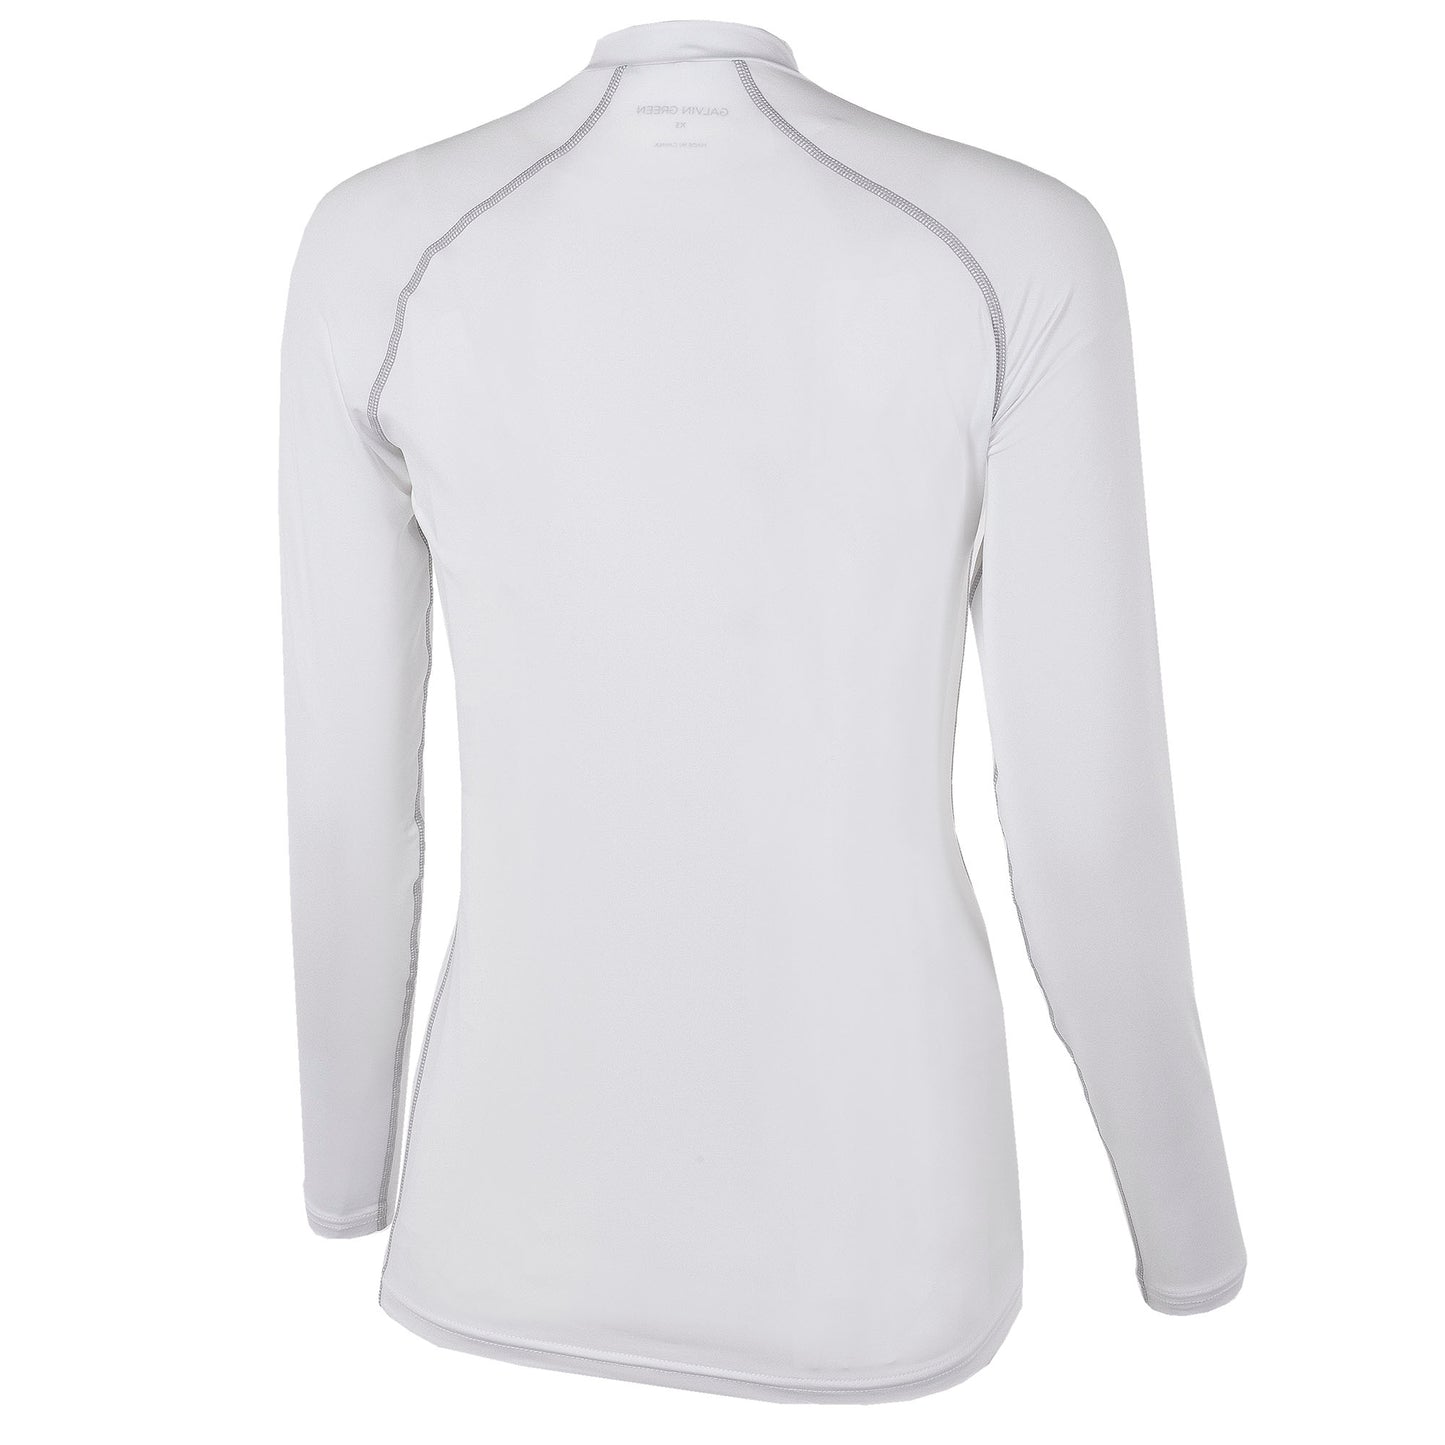 Galvin Green Ladies SKINTIGHT Long Sleeve Base Layer in White